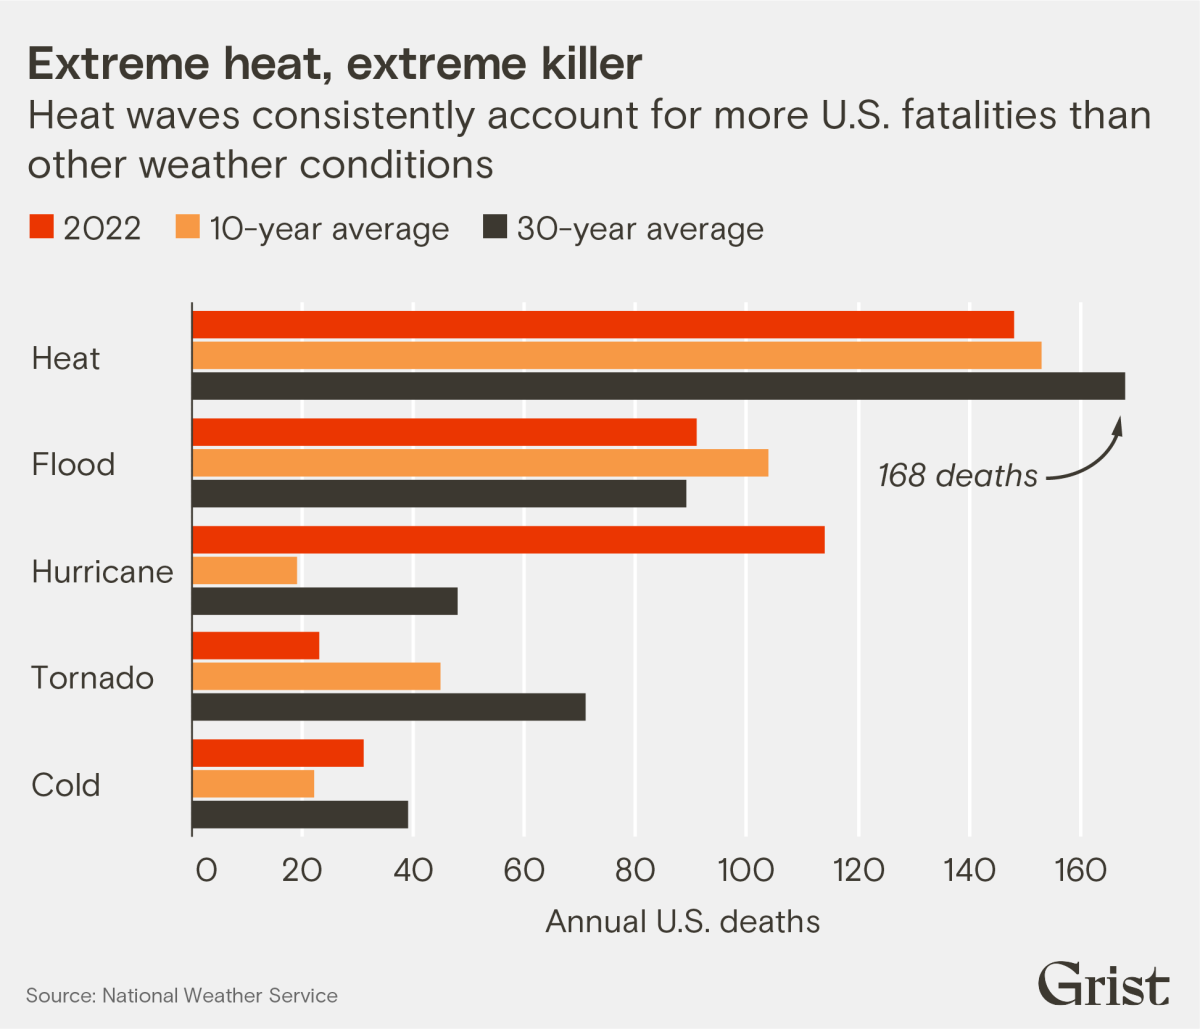 A line chart showing heat waves that consistently account for more U.S. fatalities than other weather conditions